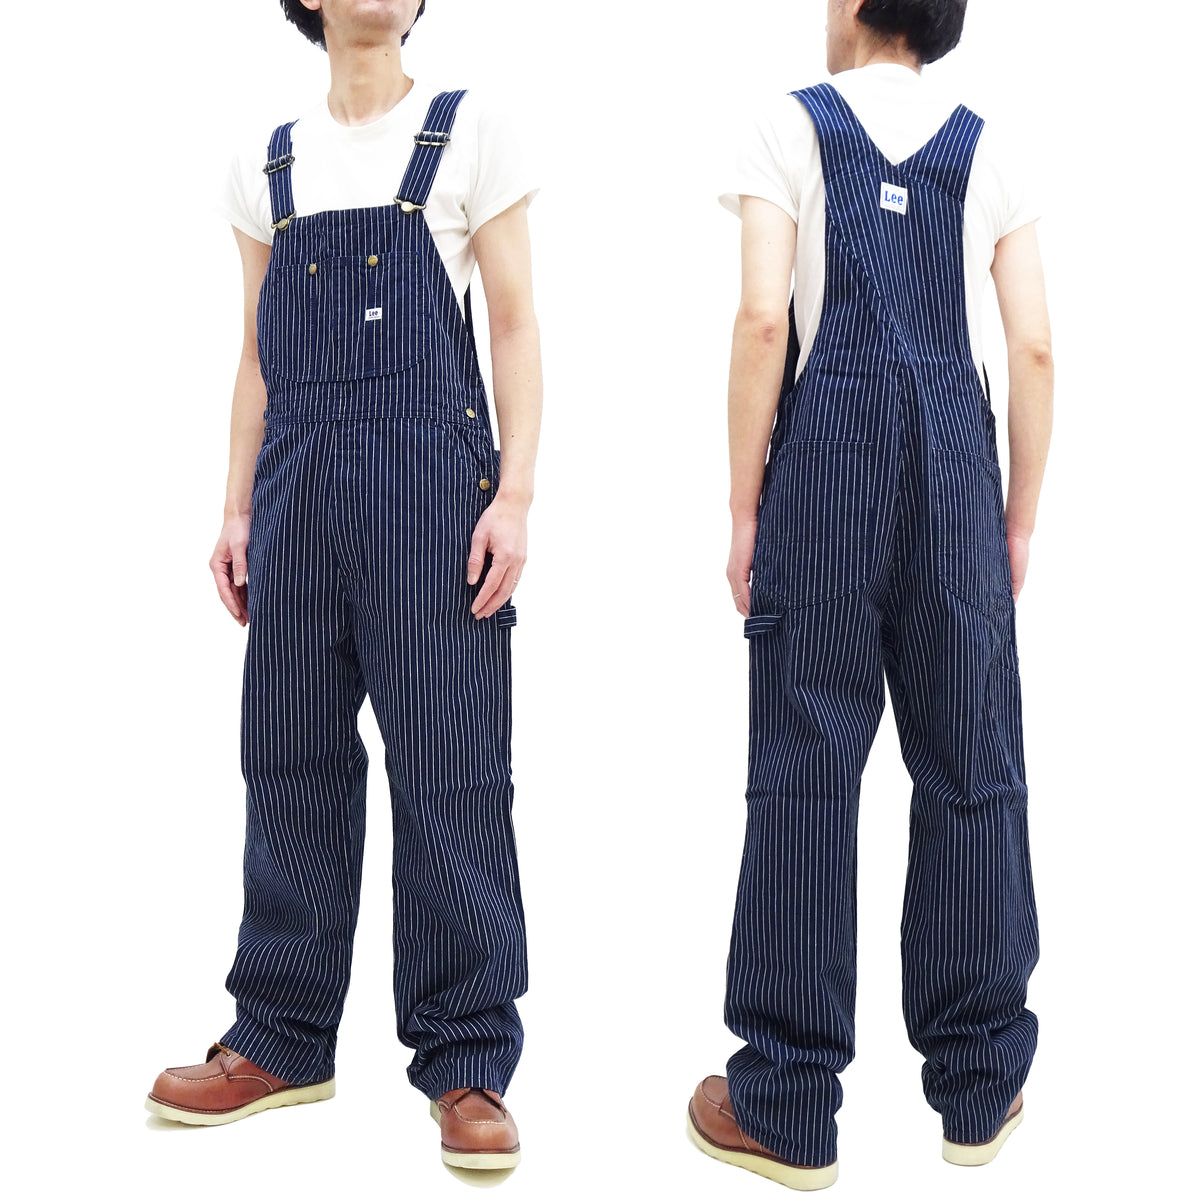 Lee Overalls Men's Casual Fashion Bib Overall High-Back LM7254 LM7254-2204  Indigo Twill with White Pinstripe Stitching